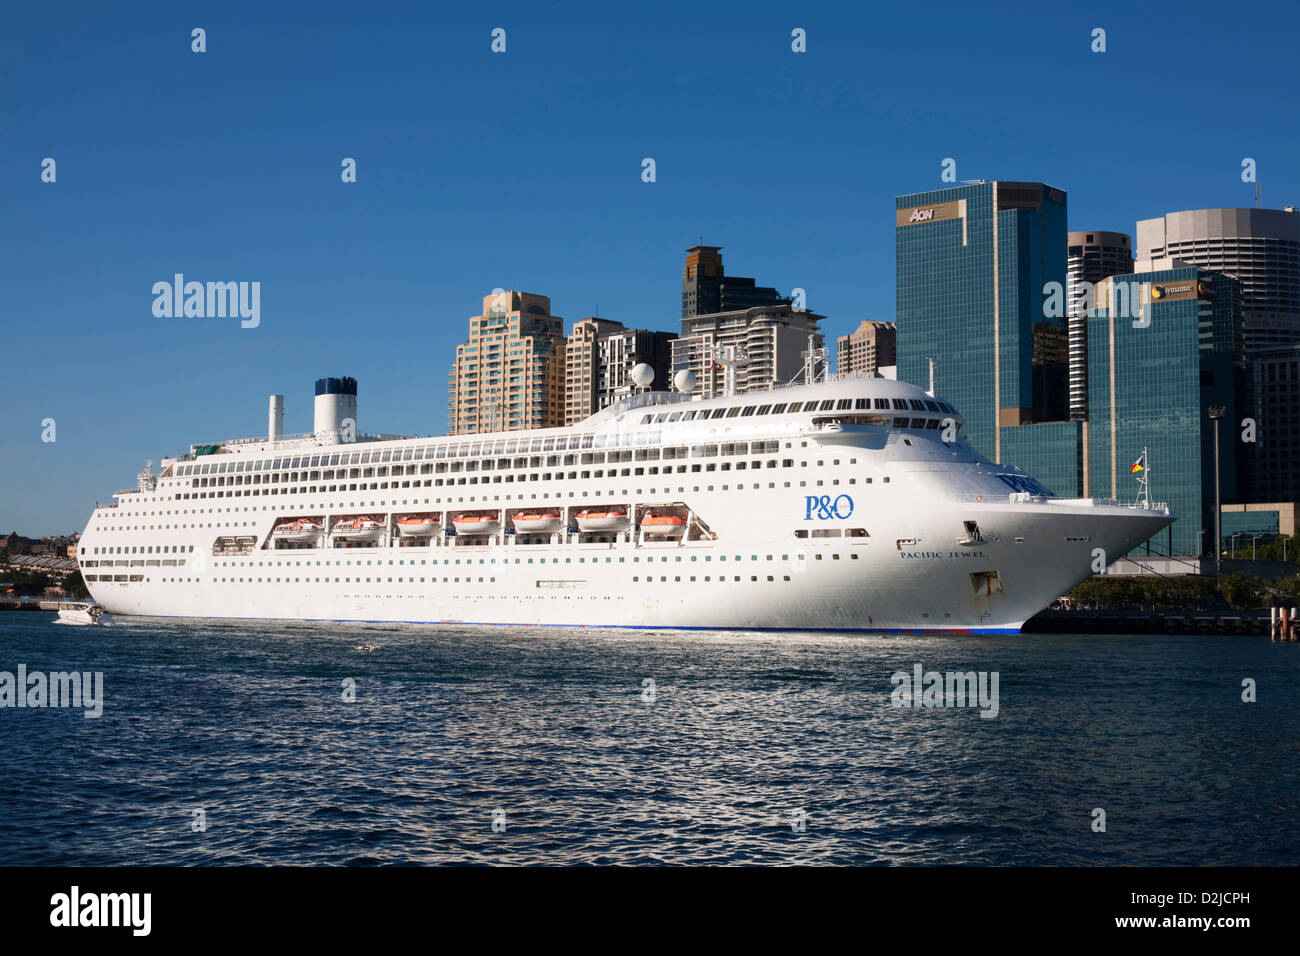 P&O Cruises superliner Pacific Jewel Cruise Ship berthed at toWharf 8  Sydney Australia Stock Photo